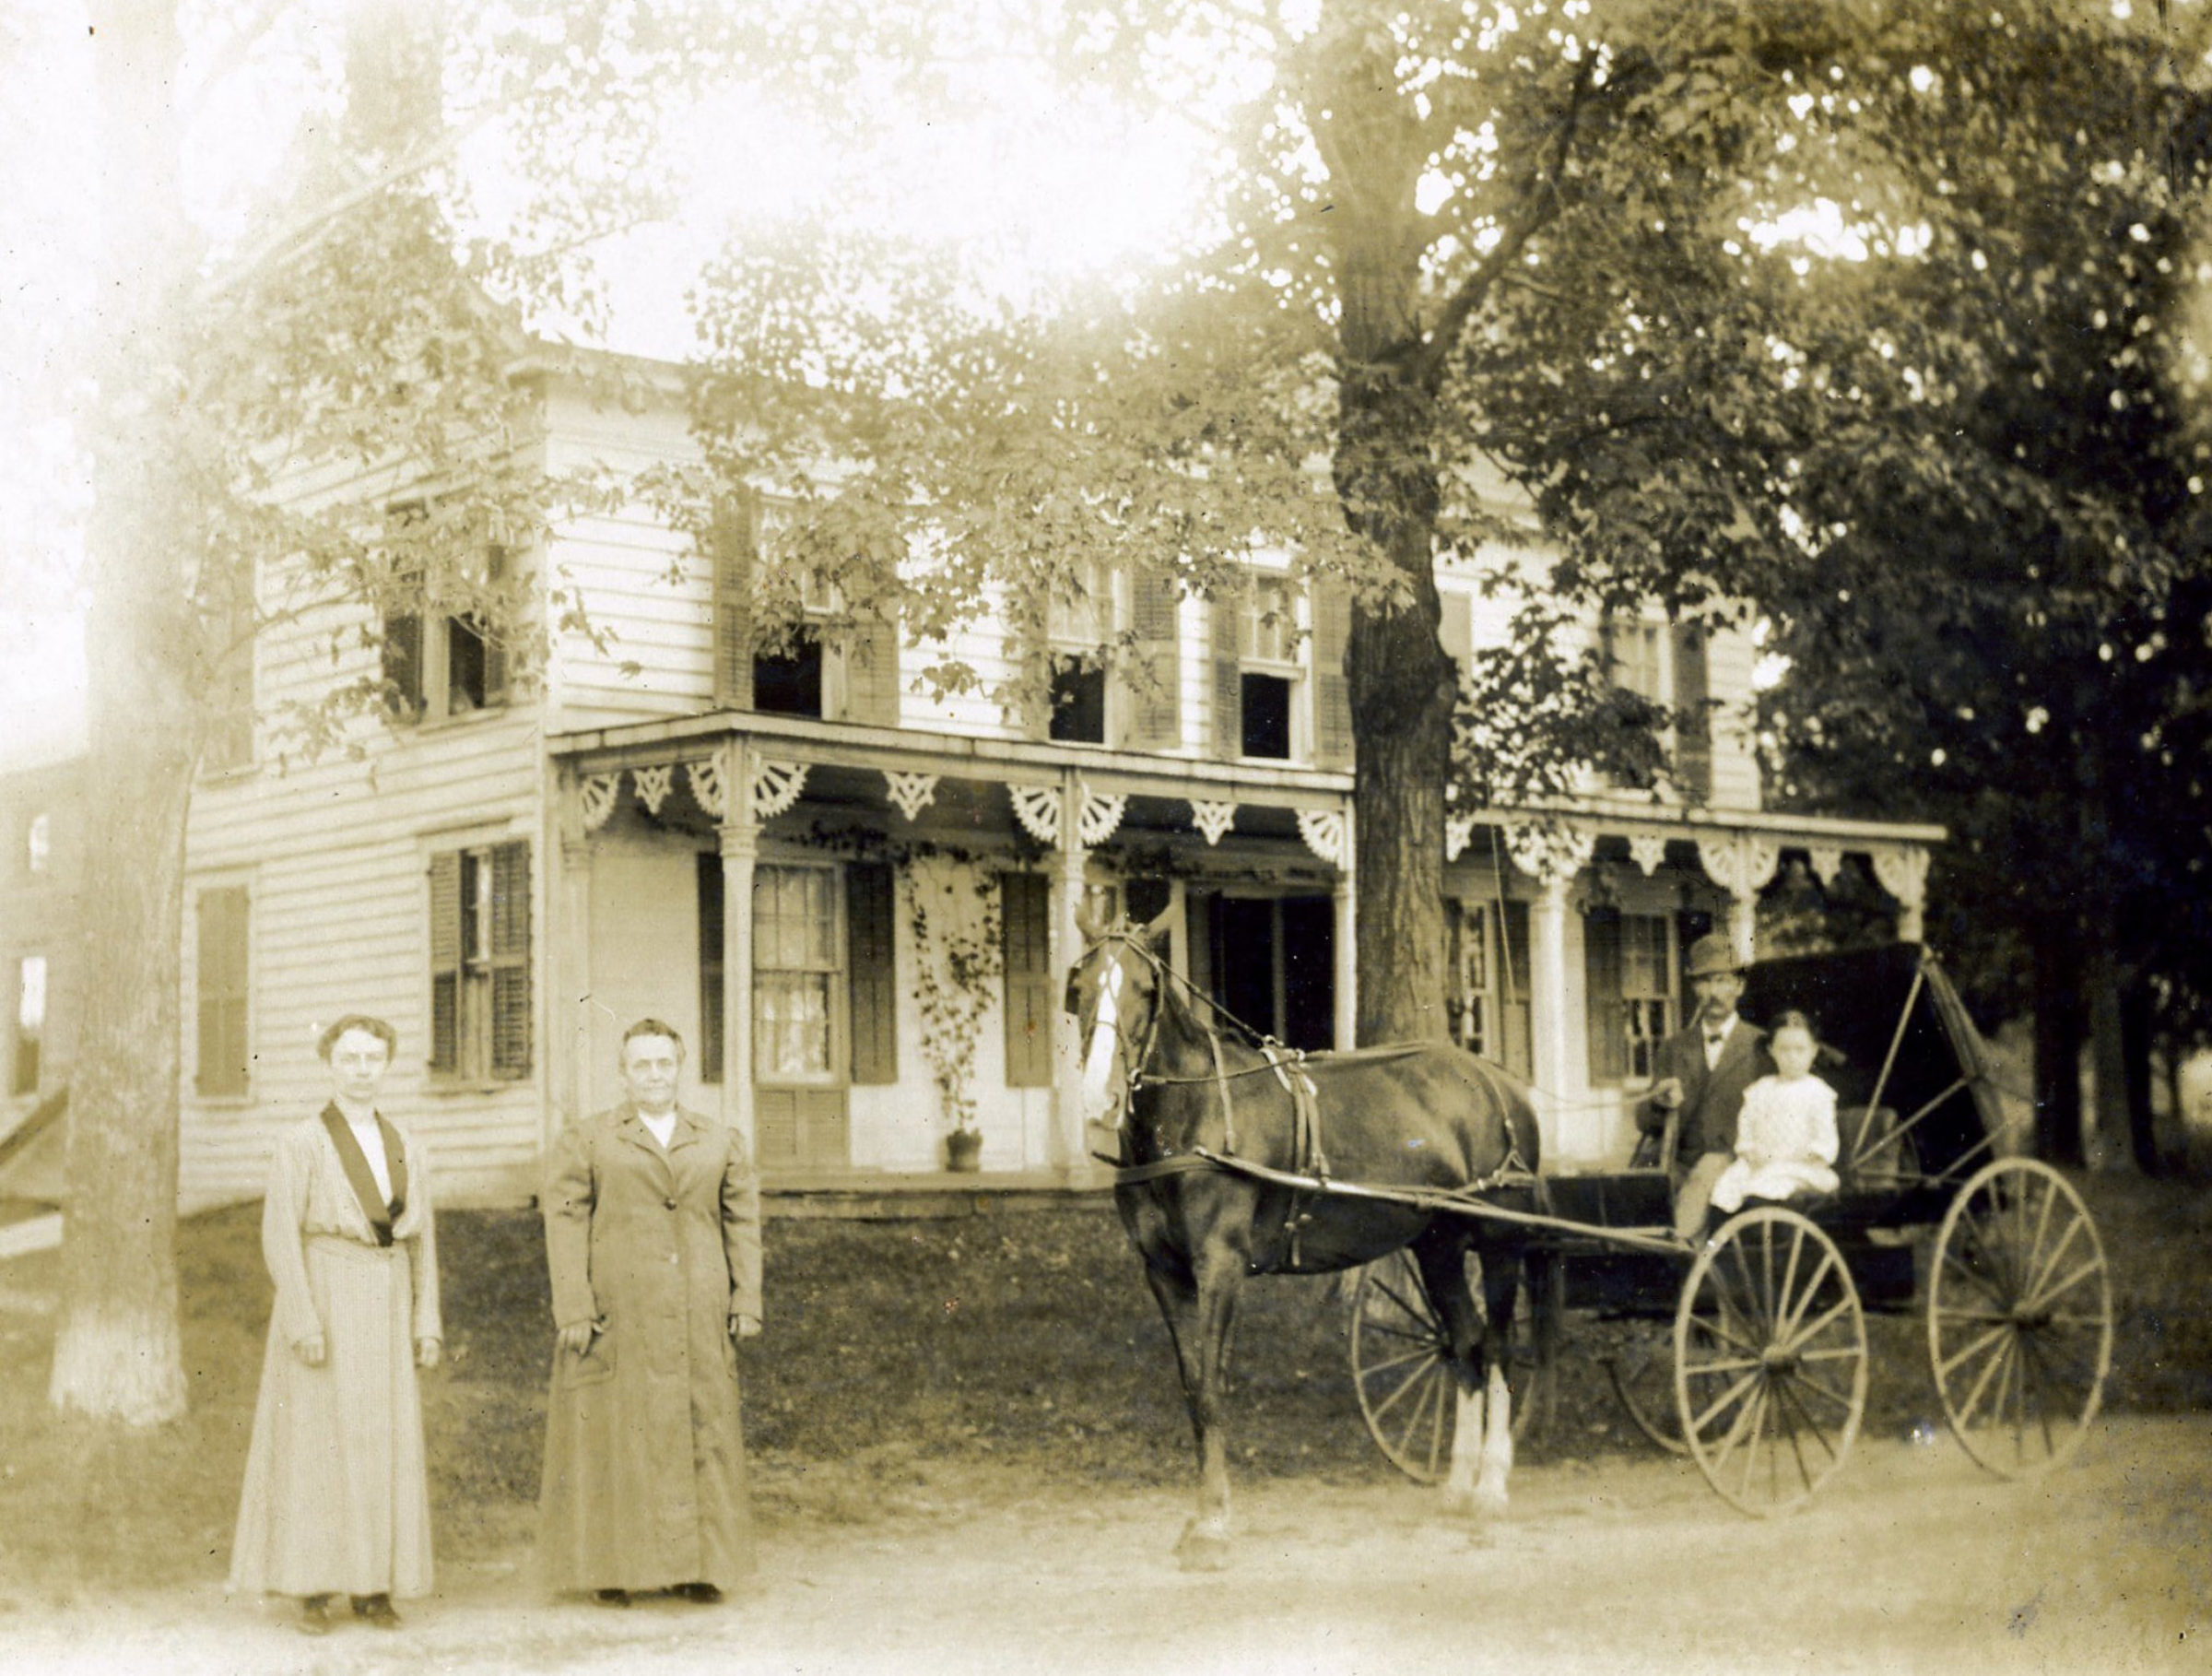 In the 1800's, New Concord B&B was a stage coach stop and inn known as the "Publick House"